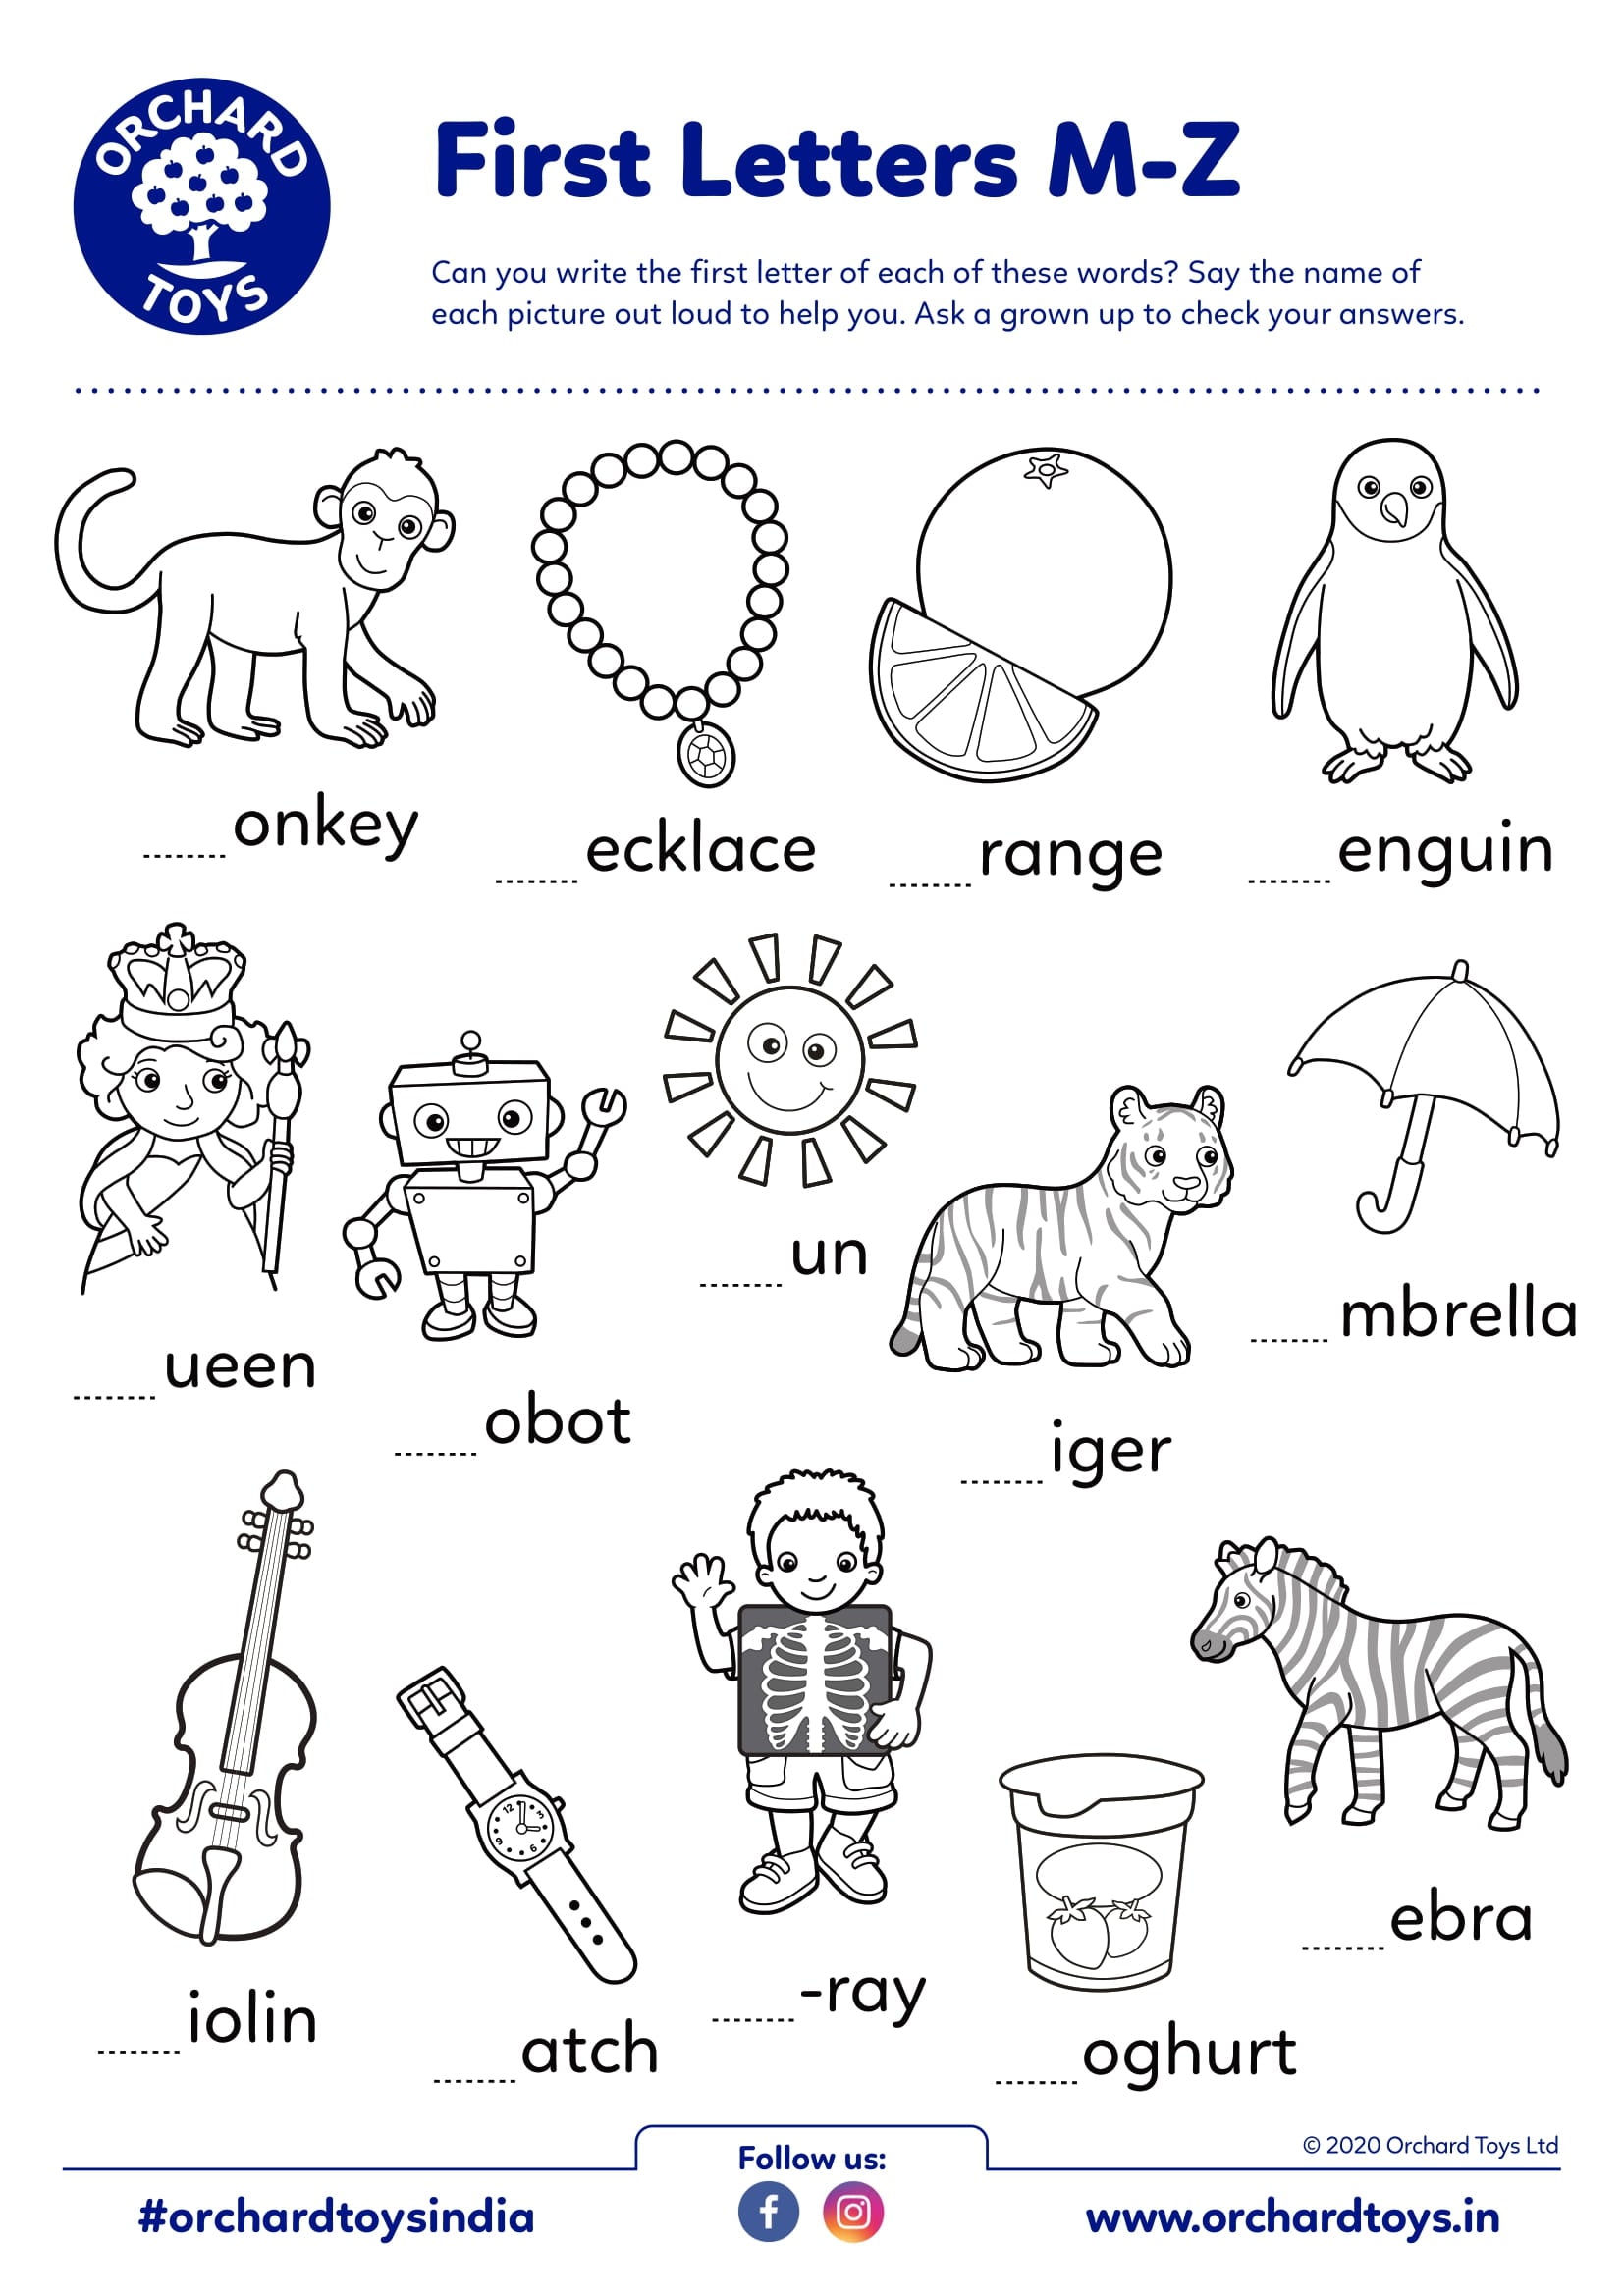 First Letters M-Z Activity Sheet